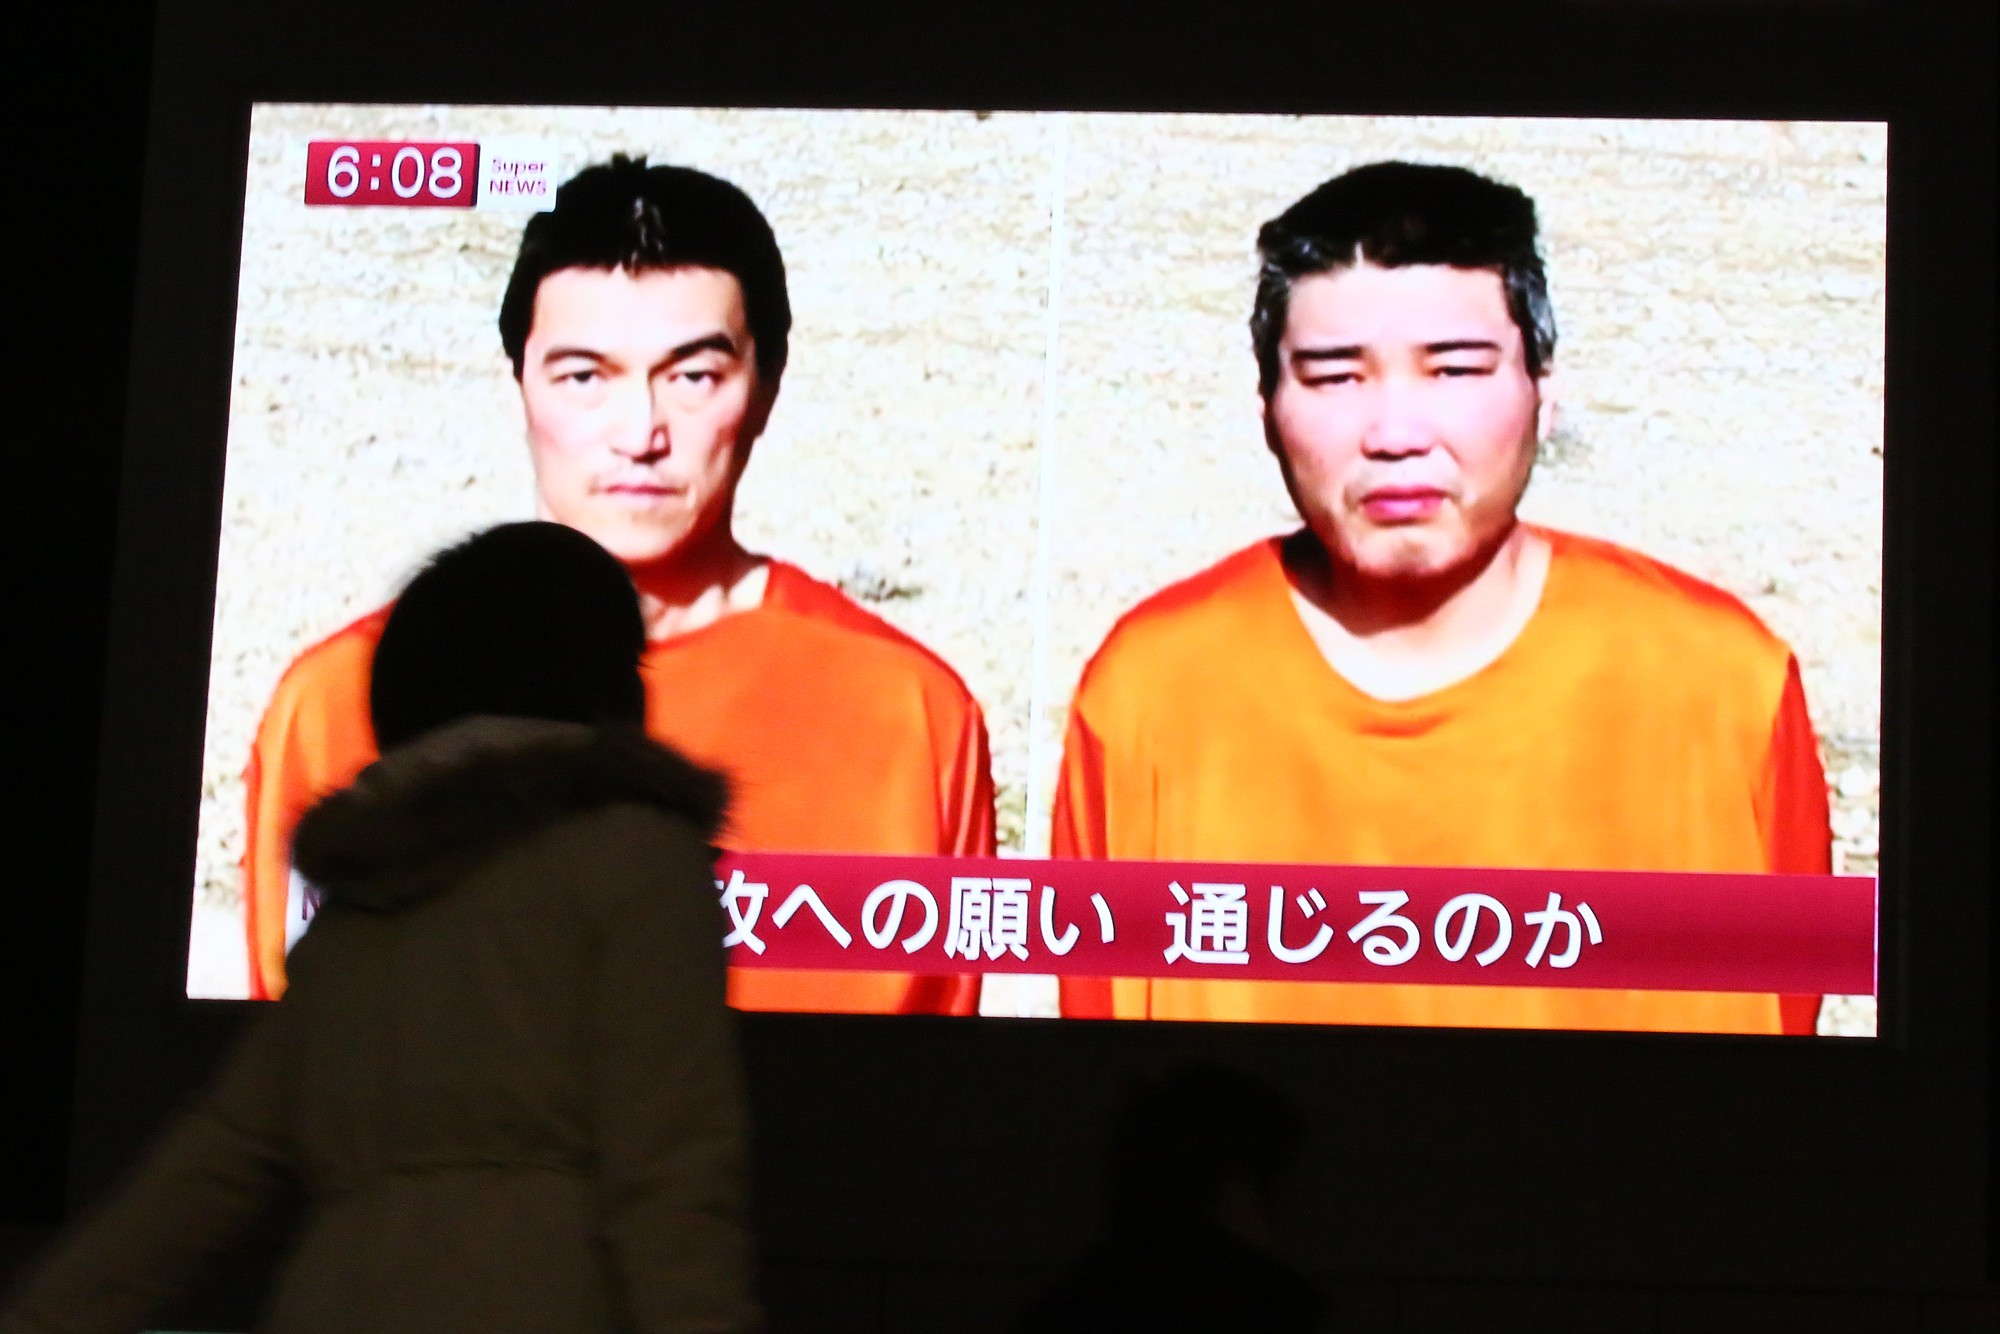 A passer-by in Tokyo watches a TV news program Friday reporting on two Japanese hostages, Kenji Goto, left, and Haruna Yukawa, held by the Islamic State group. Militants affiliated with the Islamic State group have posted an online warning that the &quot;countdown has begun&quot; for the group to kill the pair.